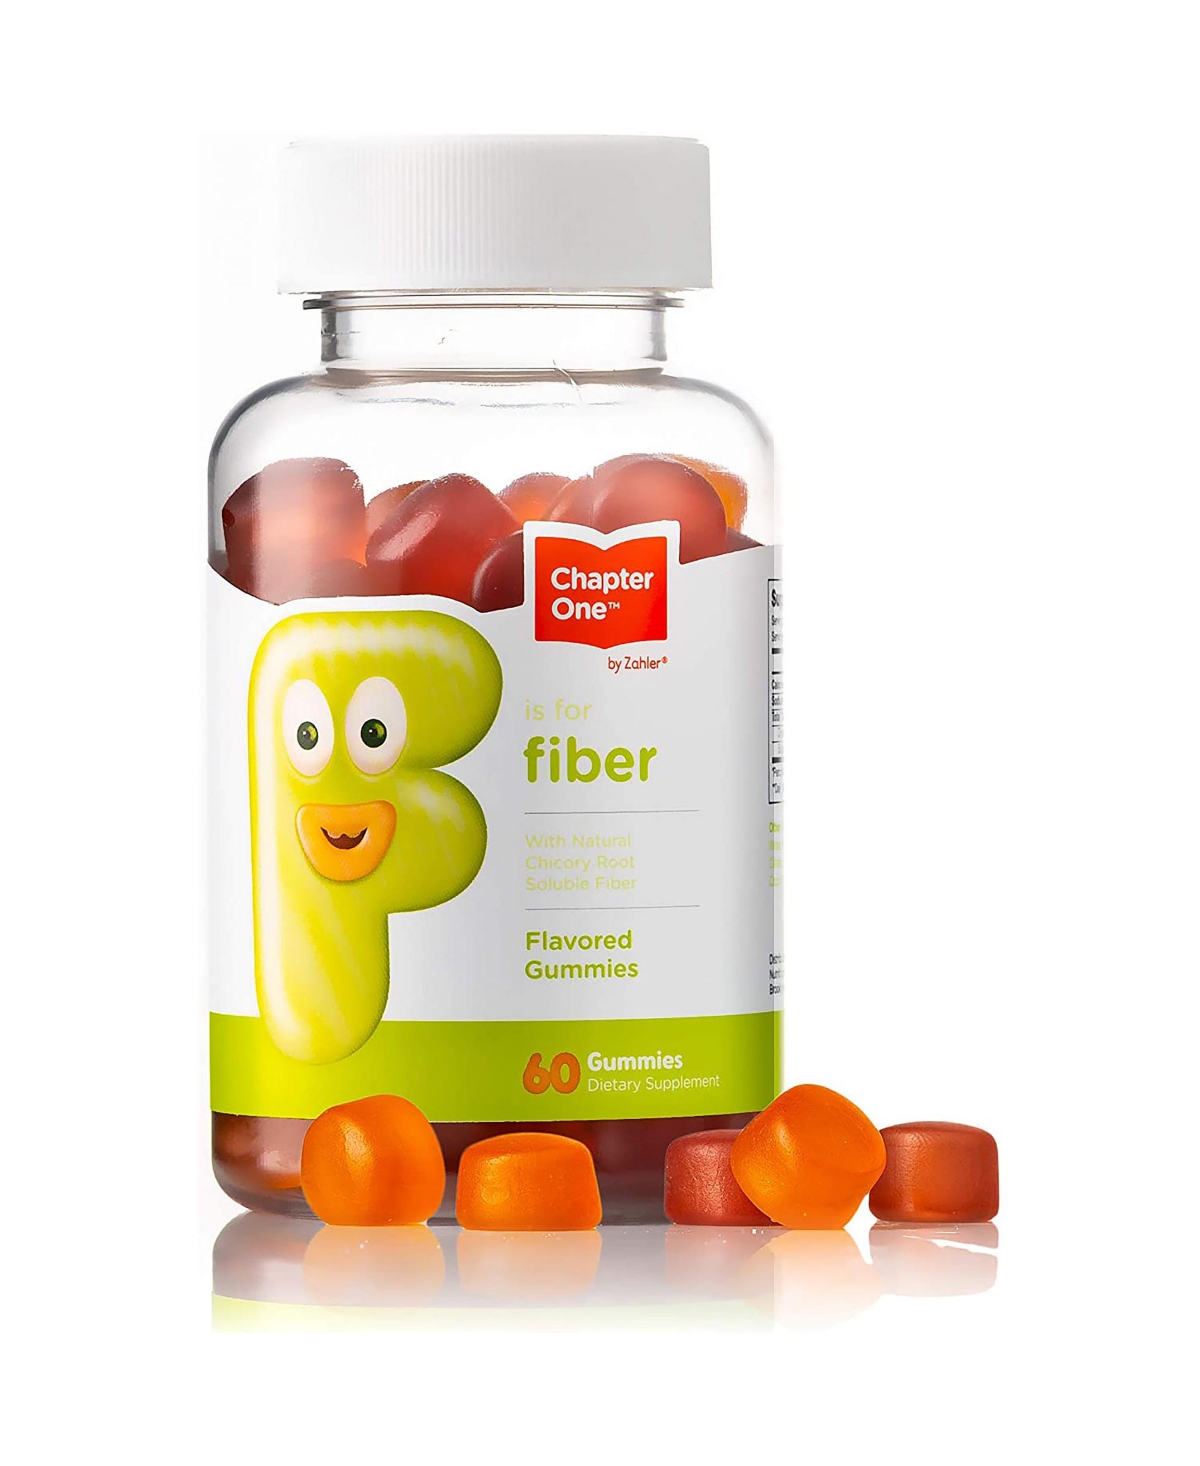 Chapter One Fiber with Natural Chicory Root - 60 Flavored Gummies